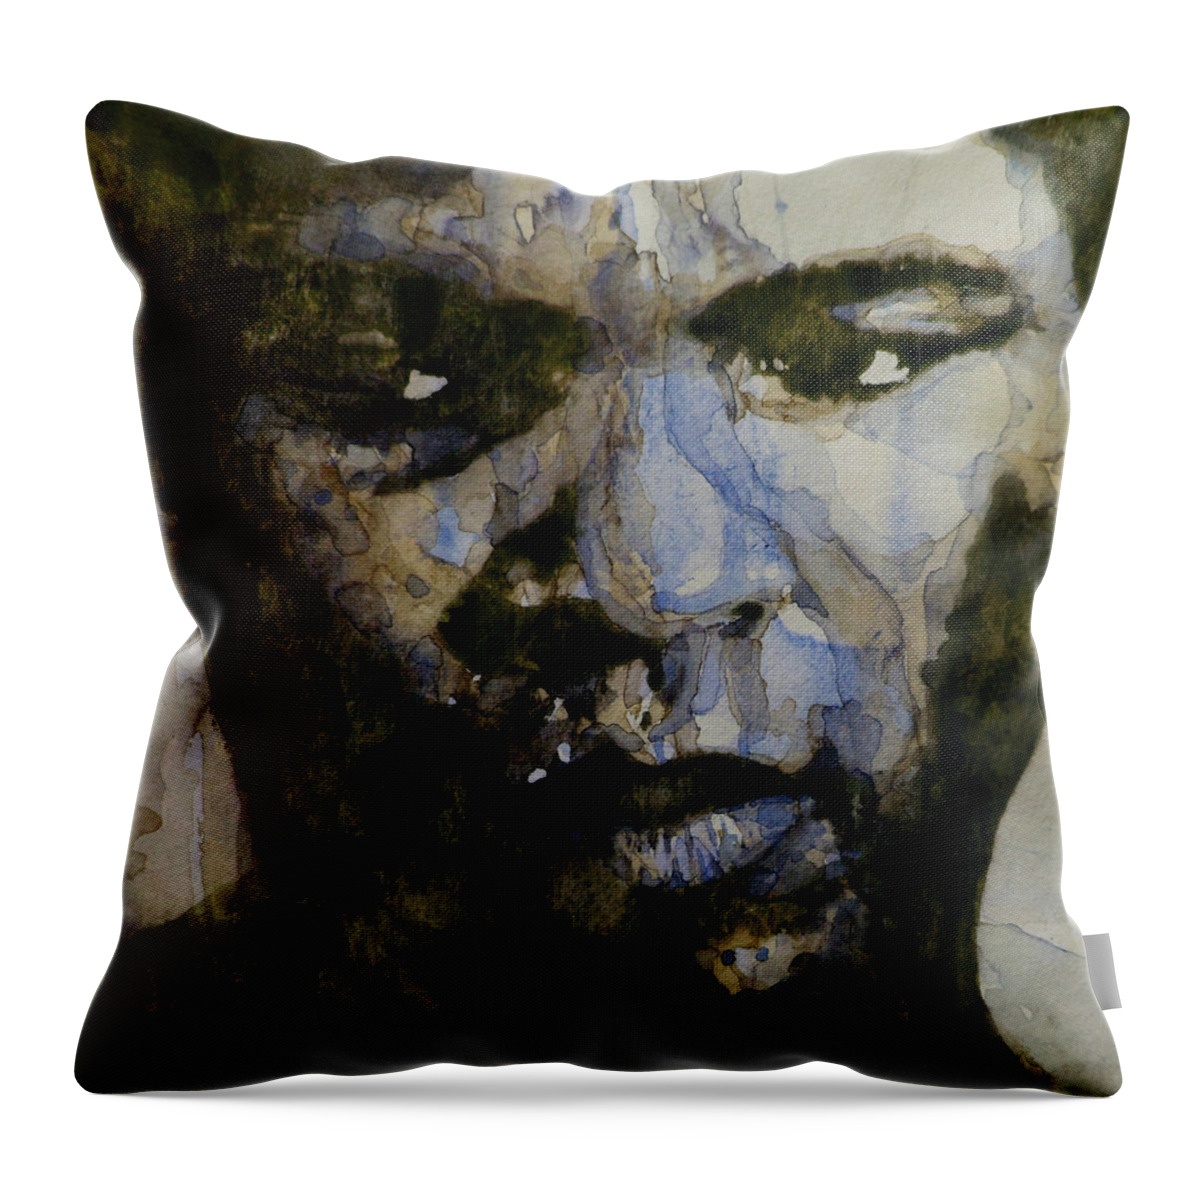 Muhammad Ali Throw Pillow featuring the painting Muhammad Ali A Change Is Gonna Come by Paul Lovering